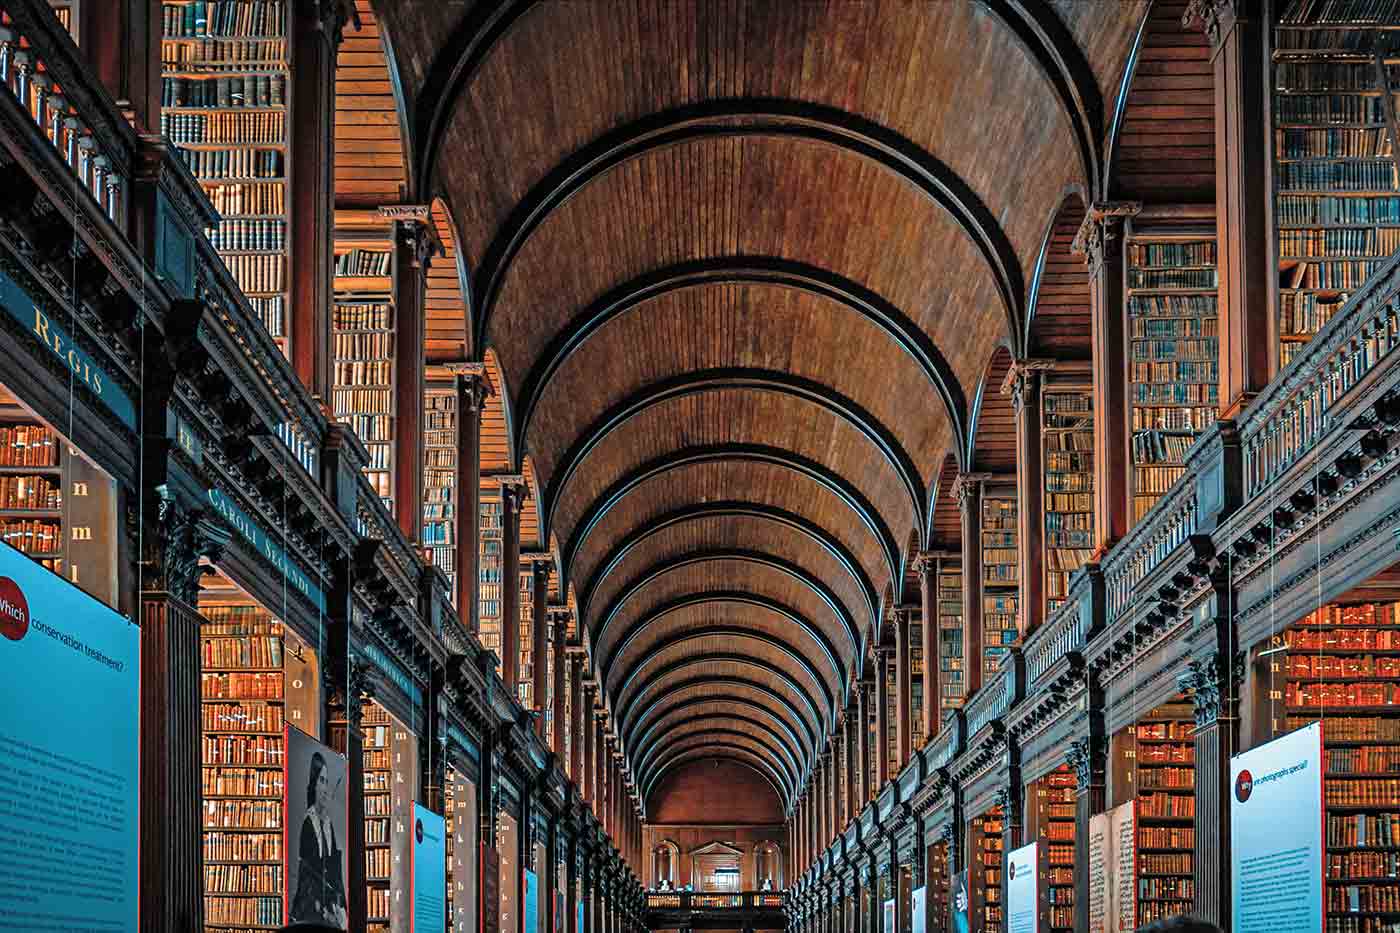 The Book of Kells and The Old Library